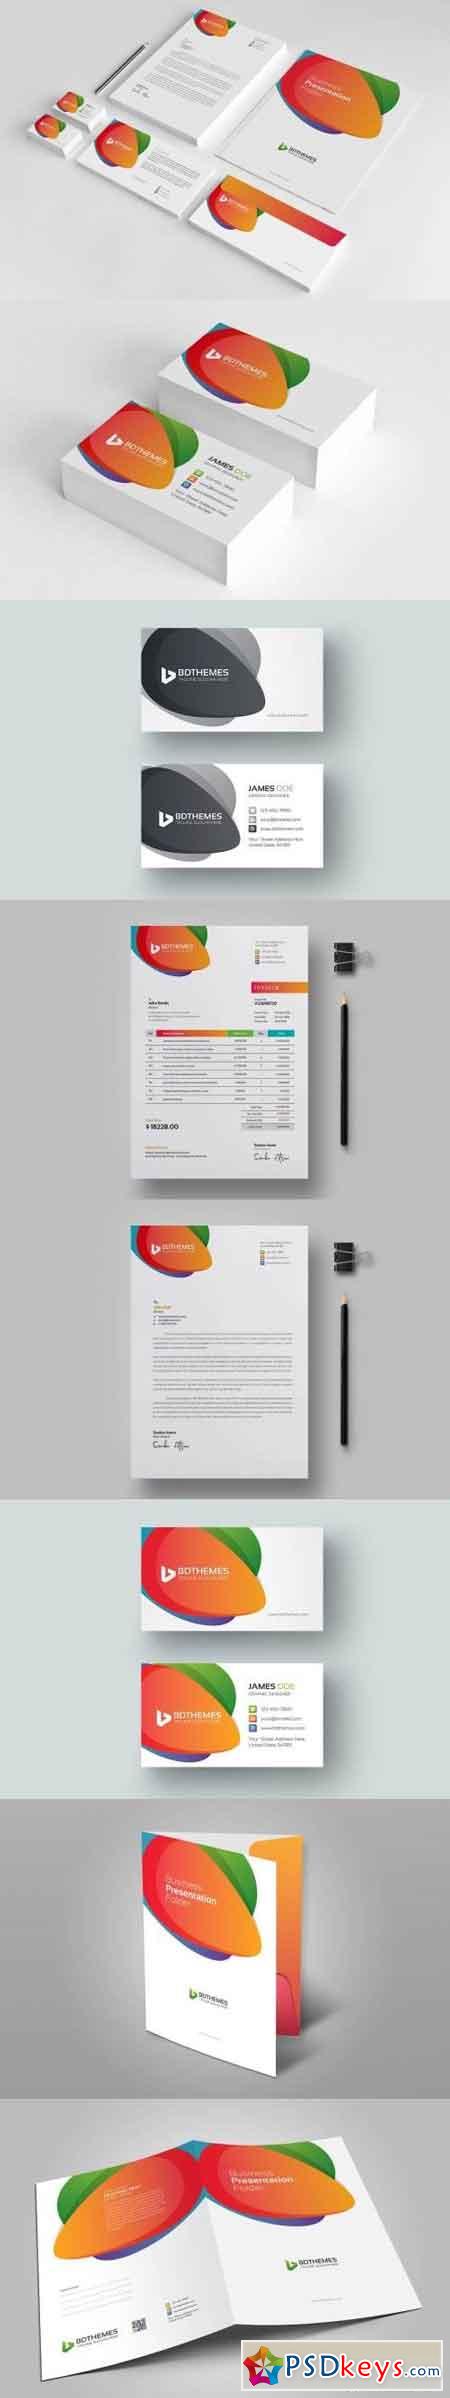 Business Stationery Template 05